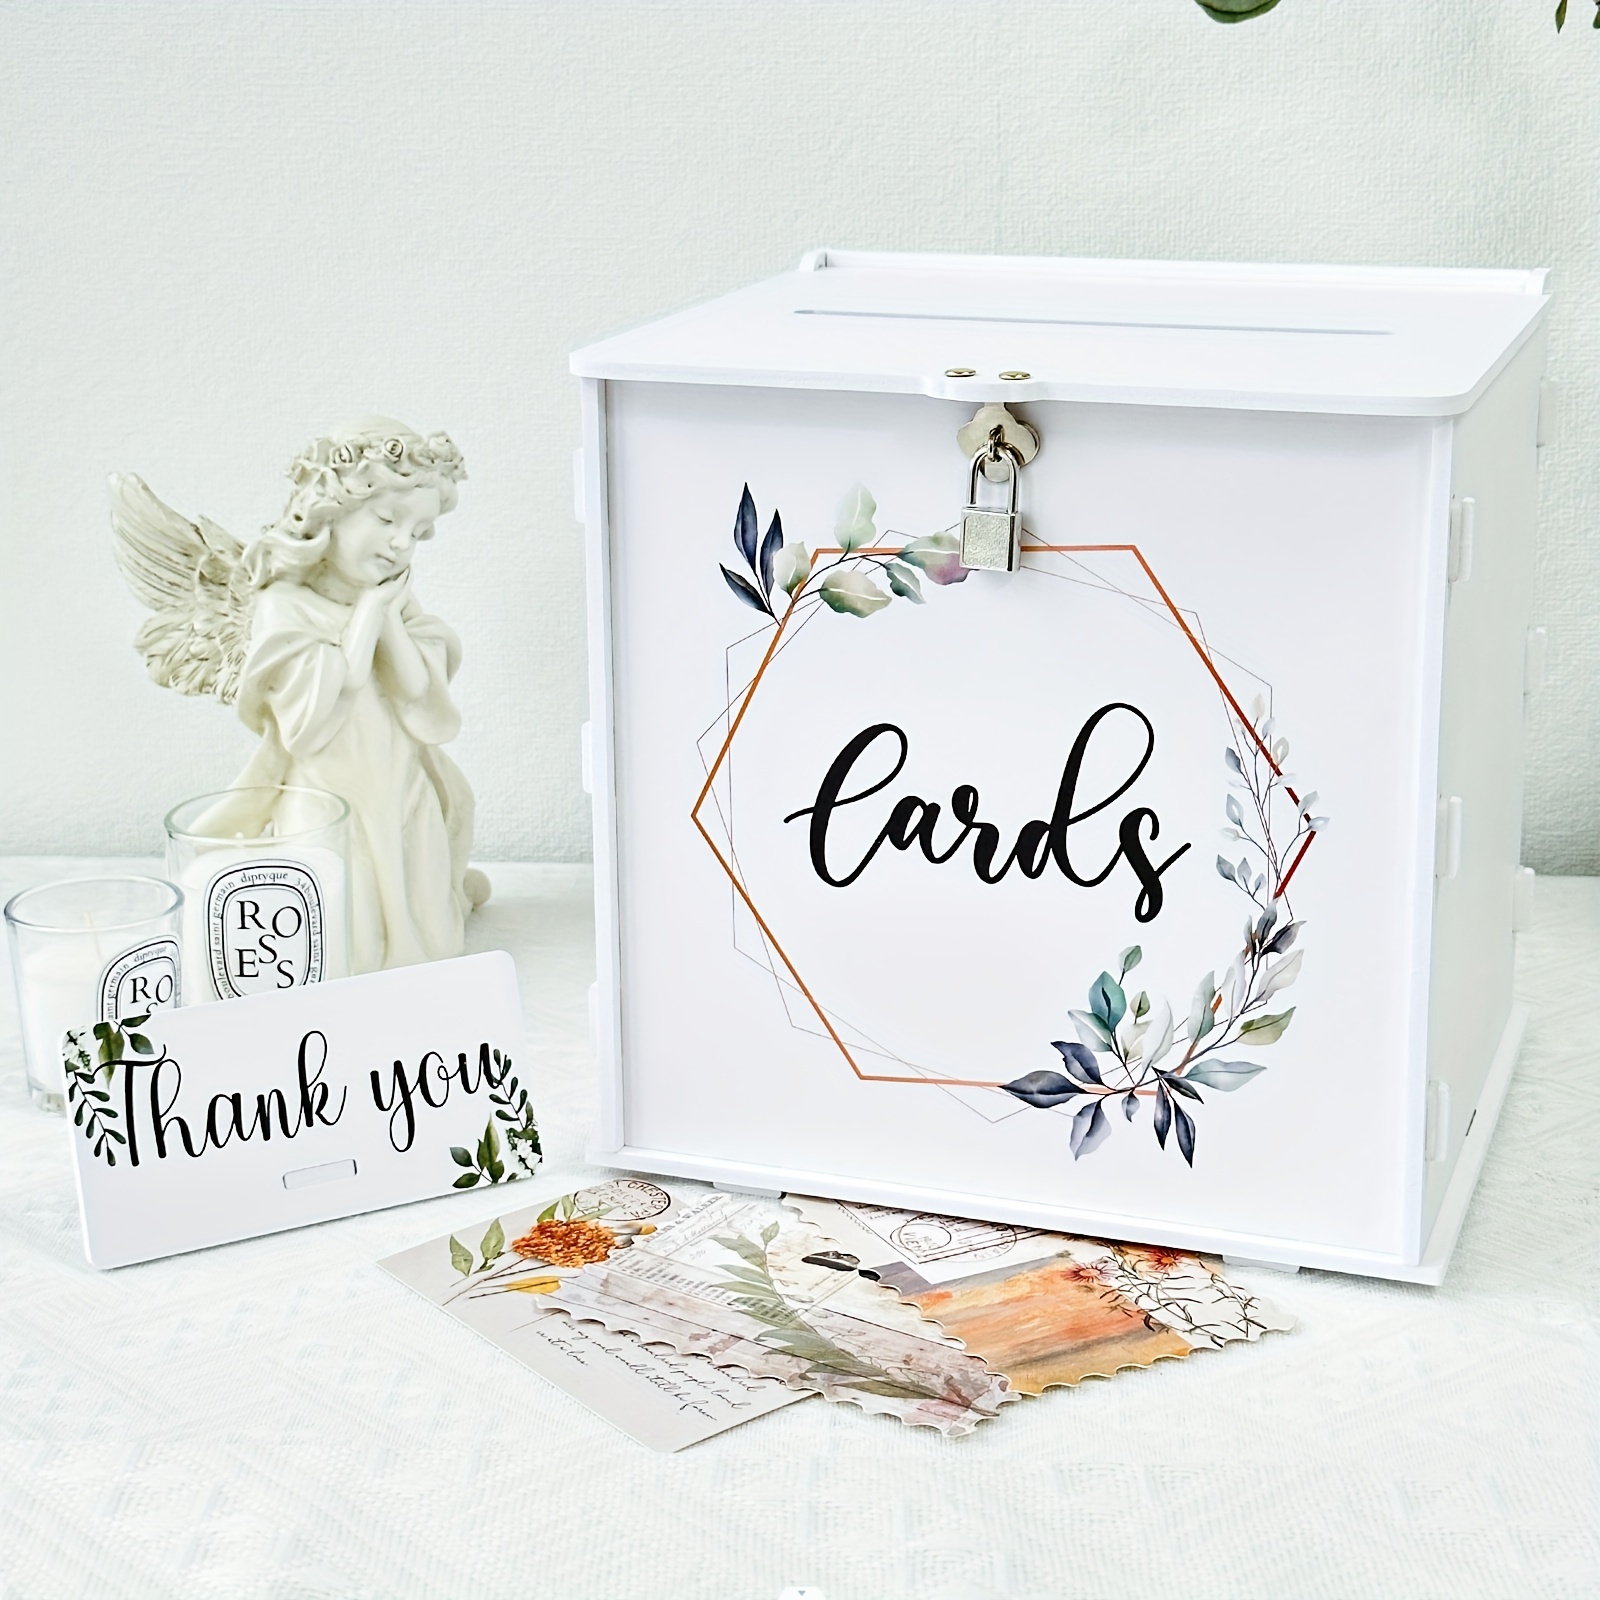 DIY Wedding Card Box with Lock Rustic Wood Card Box Gift Card Holder Card Box Perfect for Weddings, Baby Showers, Birthdays, Graduations Hold Up 225